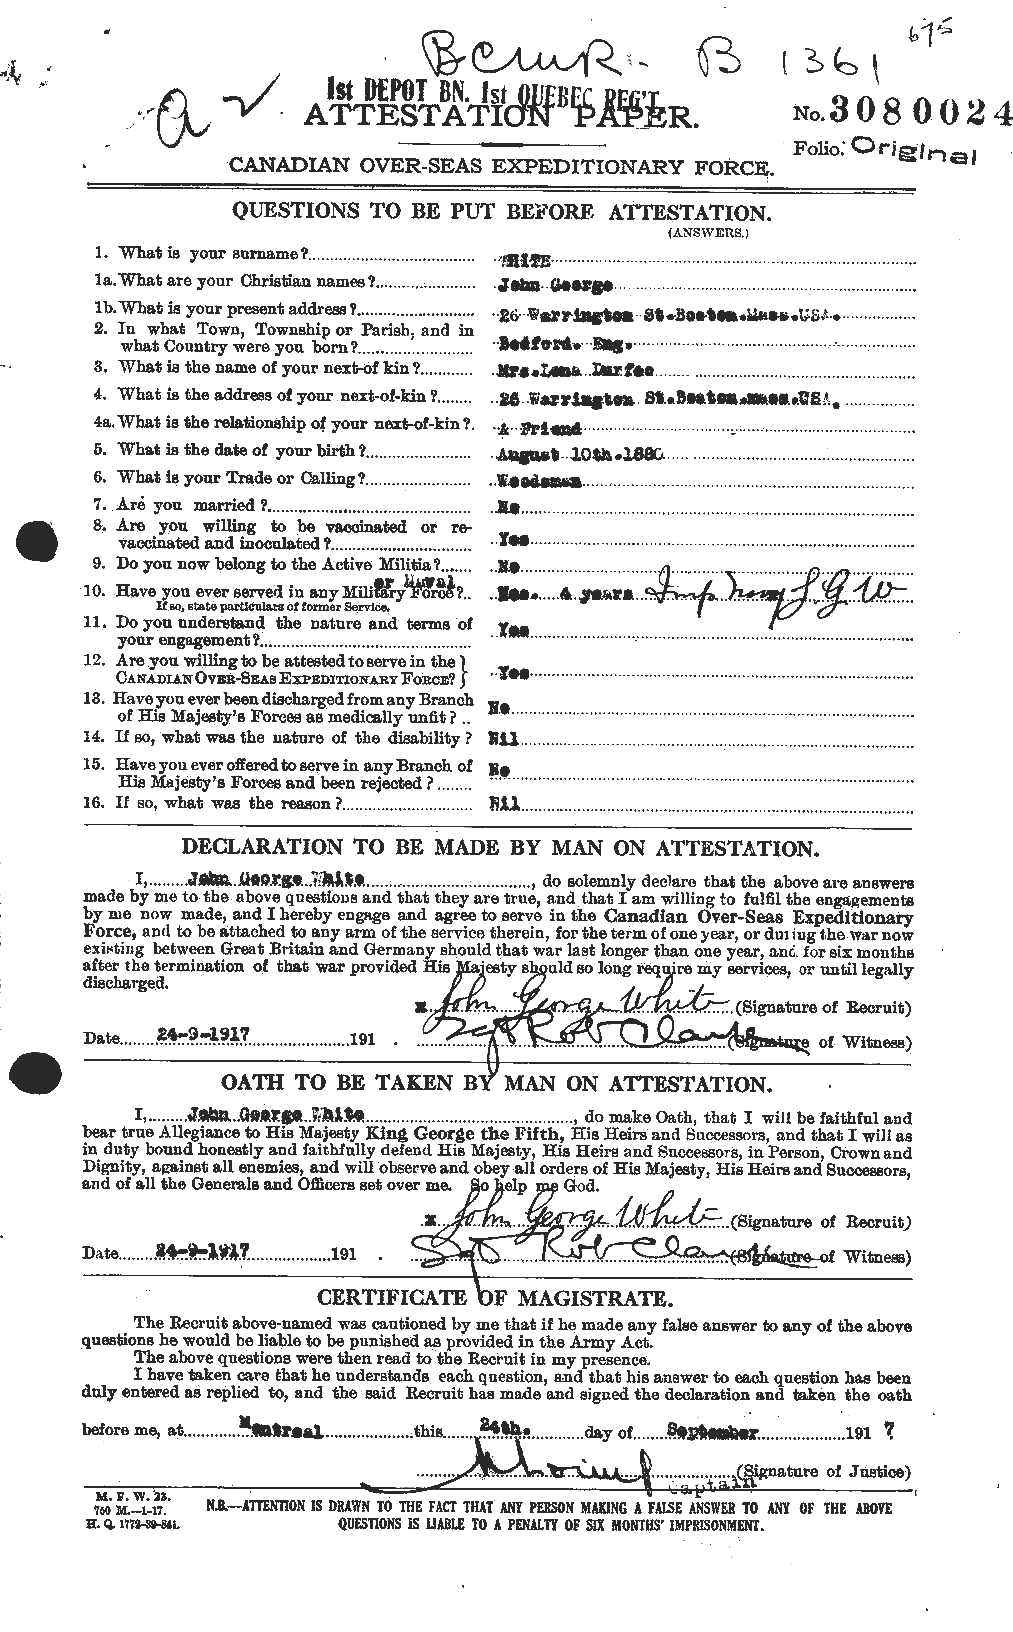 Personnel Records of the First World War - CEF 671563a